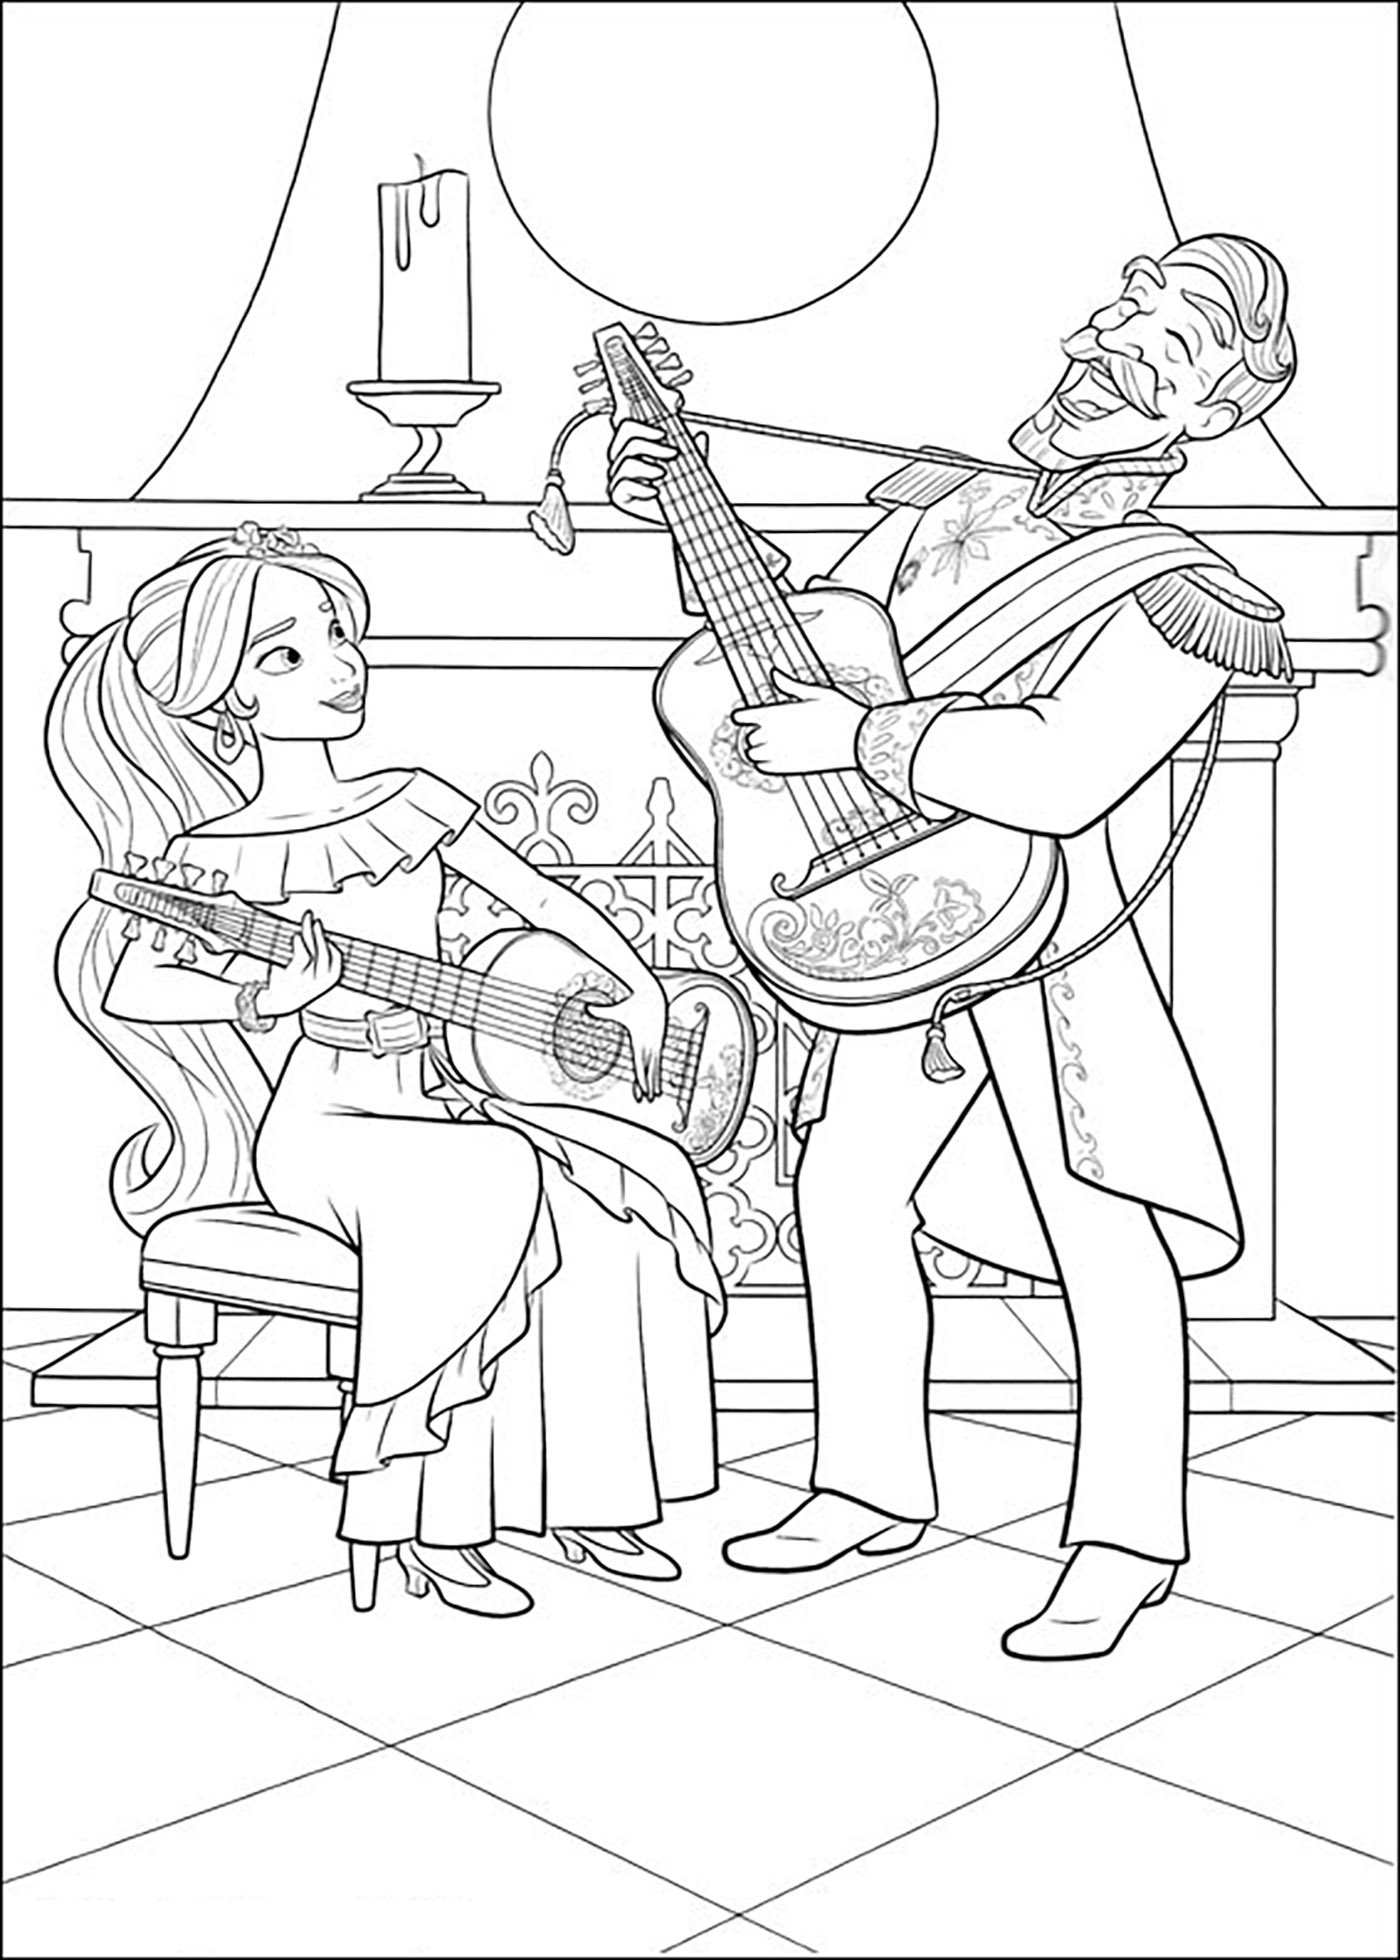 Image of Elena Avalor to color, easy for children